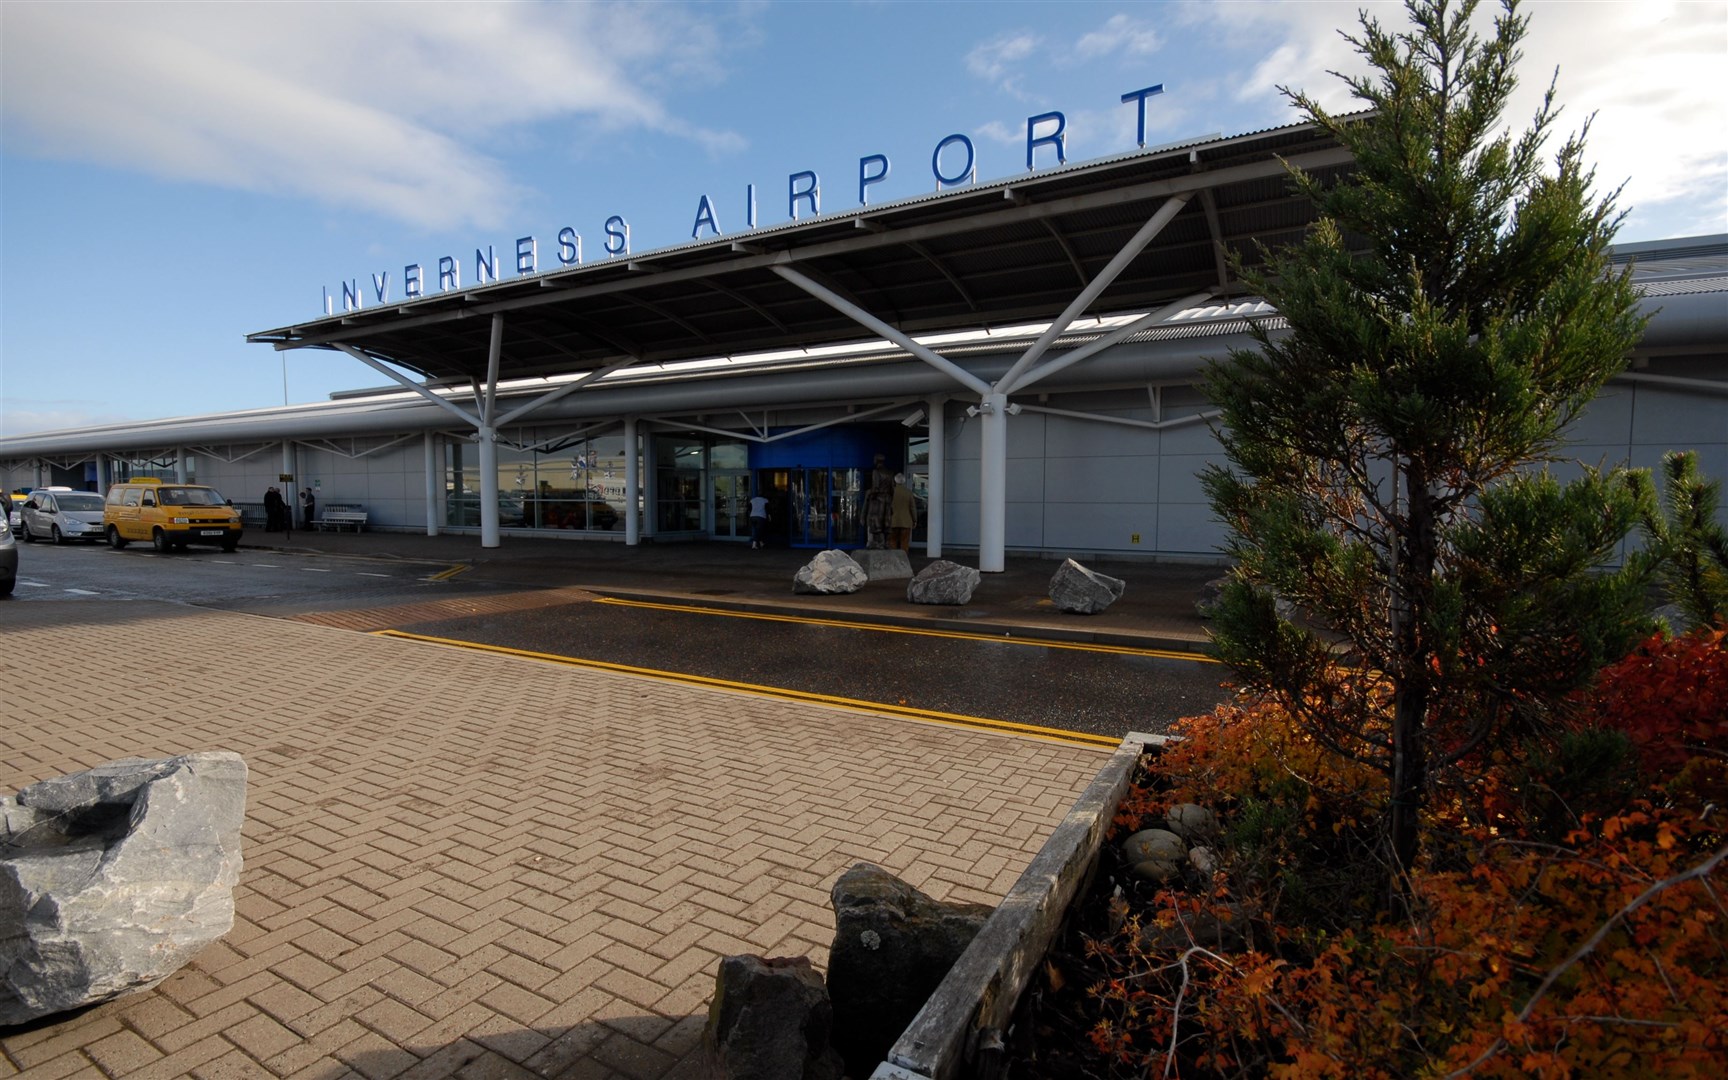 The current terminal at Inverness Airport.